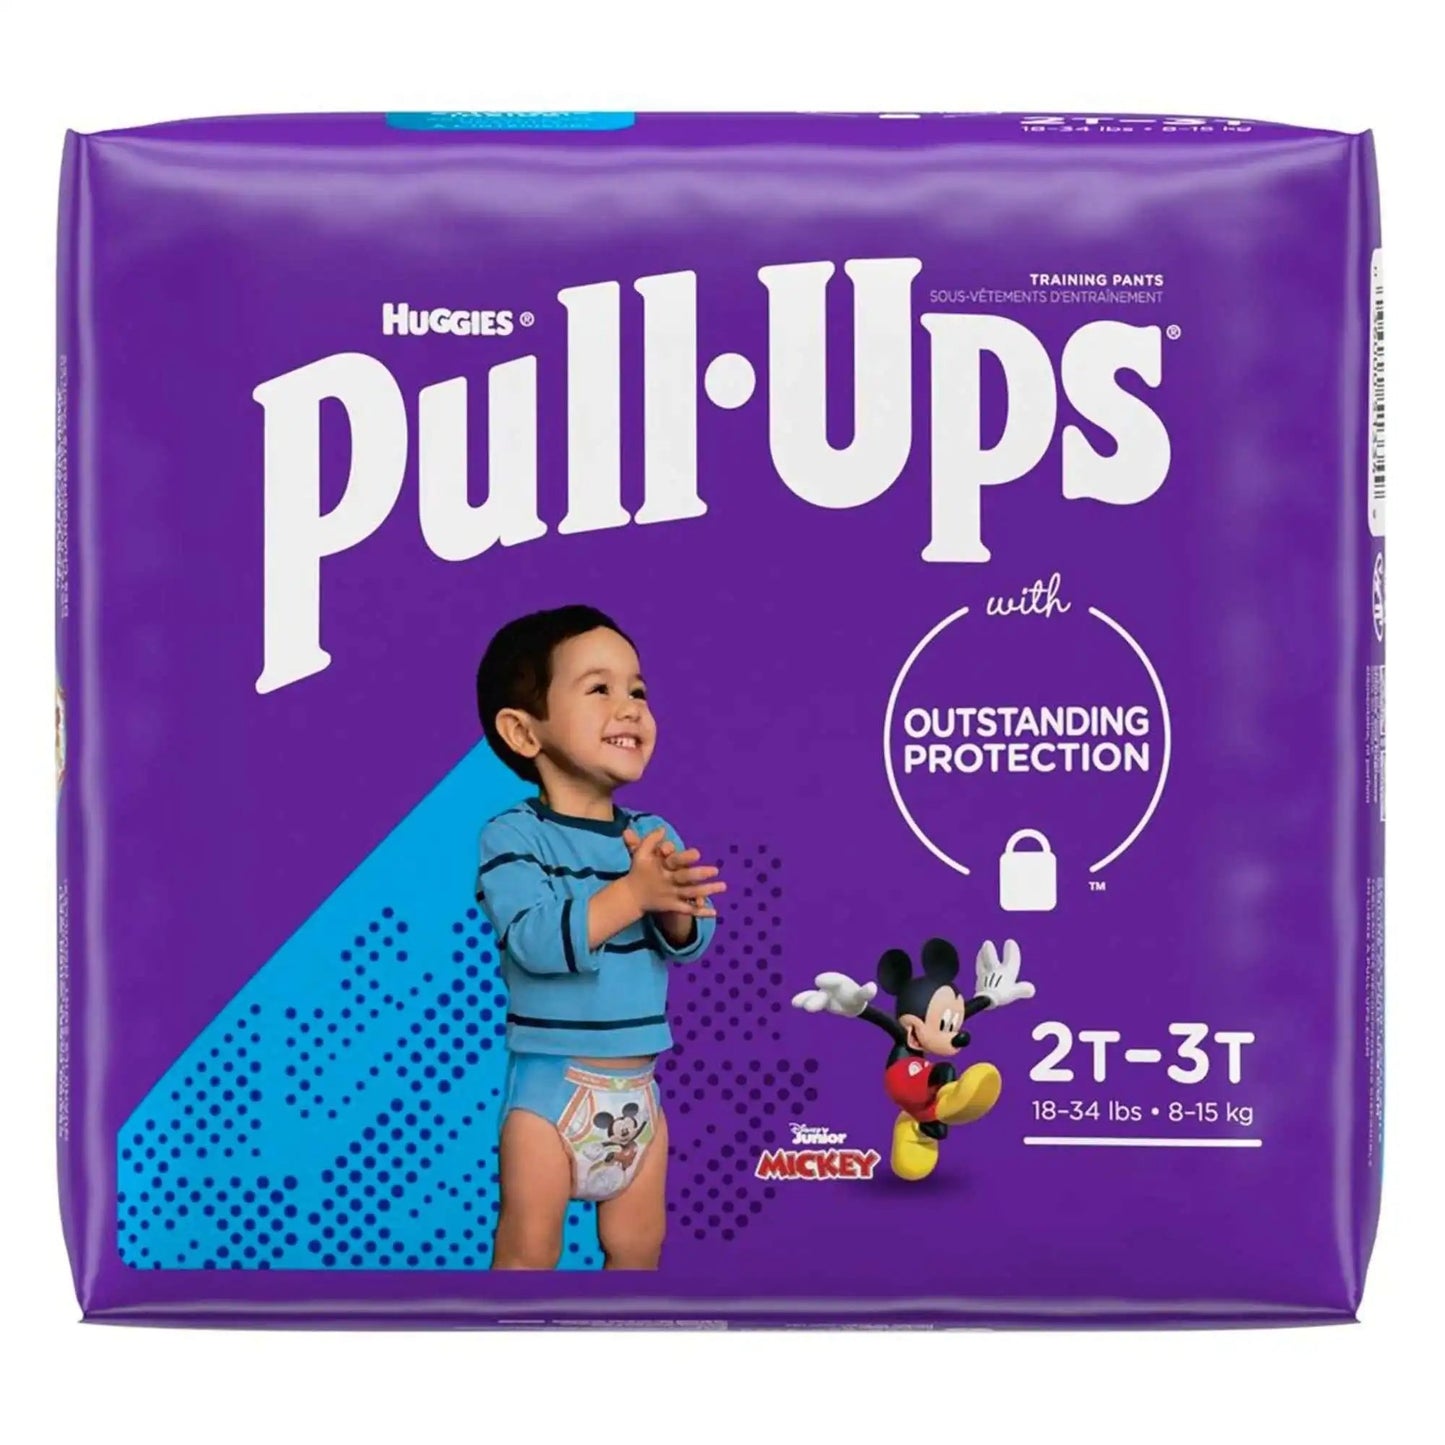 Huggies Pull-Ups Learning Designs Training Pants, 2T to 3T, 74 per Box - KatyMedSolutions